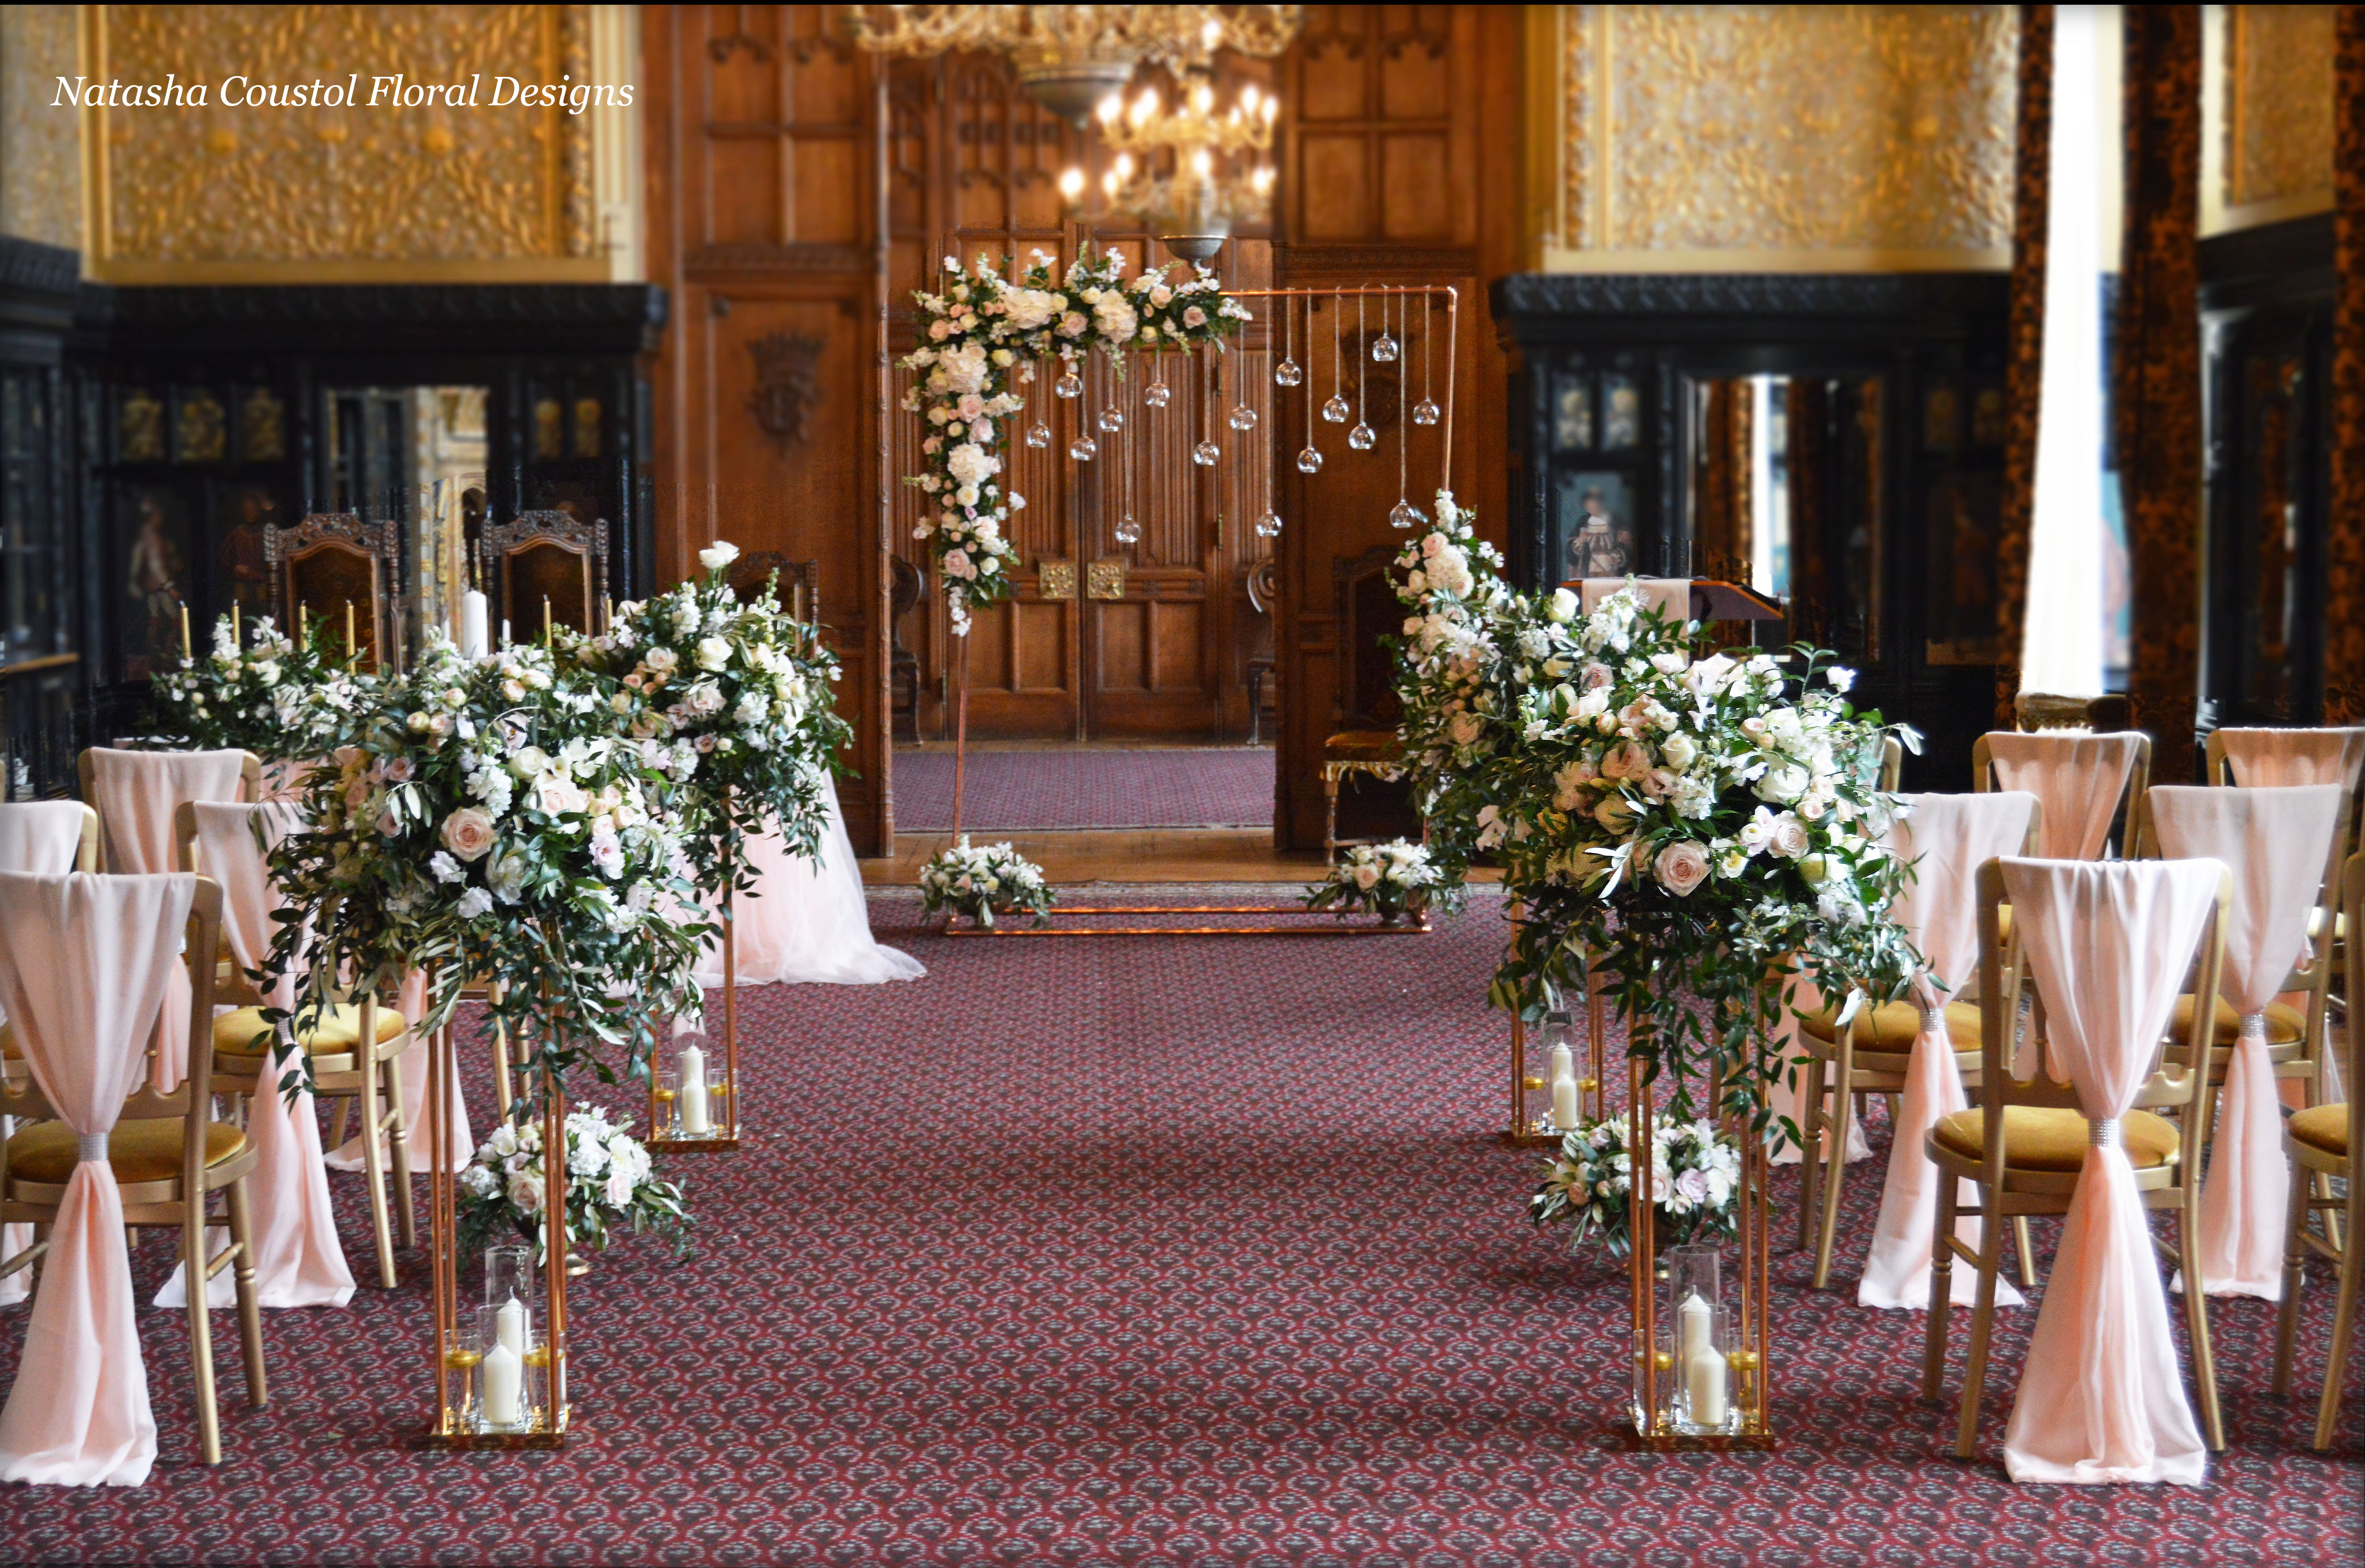 wedding-carlton-towers-ceremony-copper-arch-gold-stands-flowers-copy Grid No Space 5 Columns